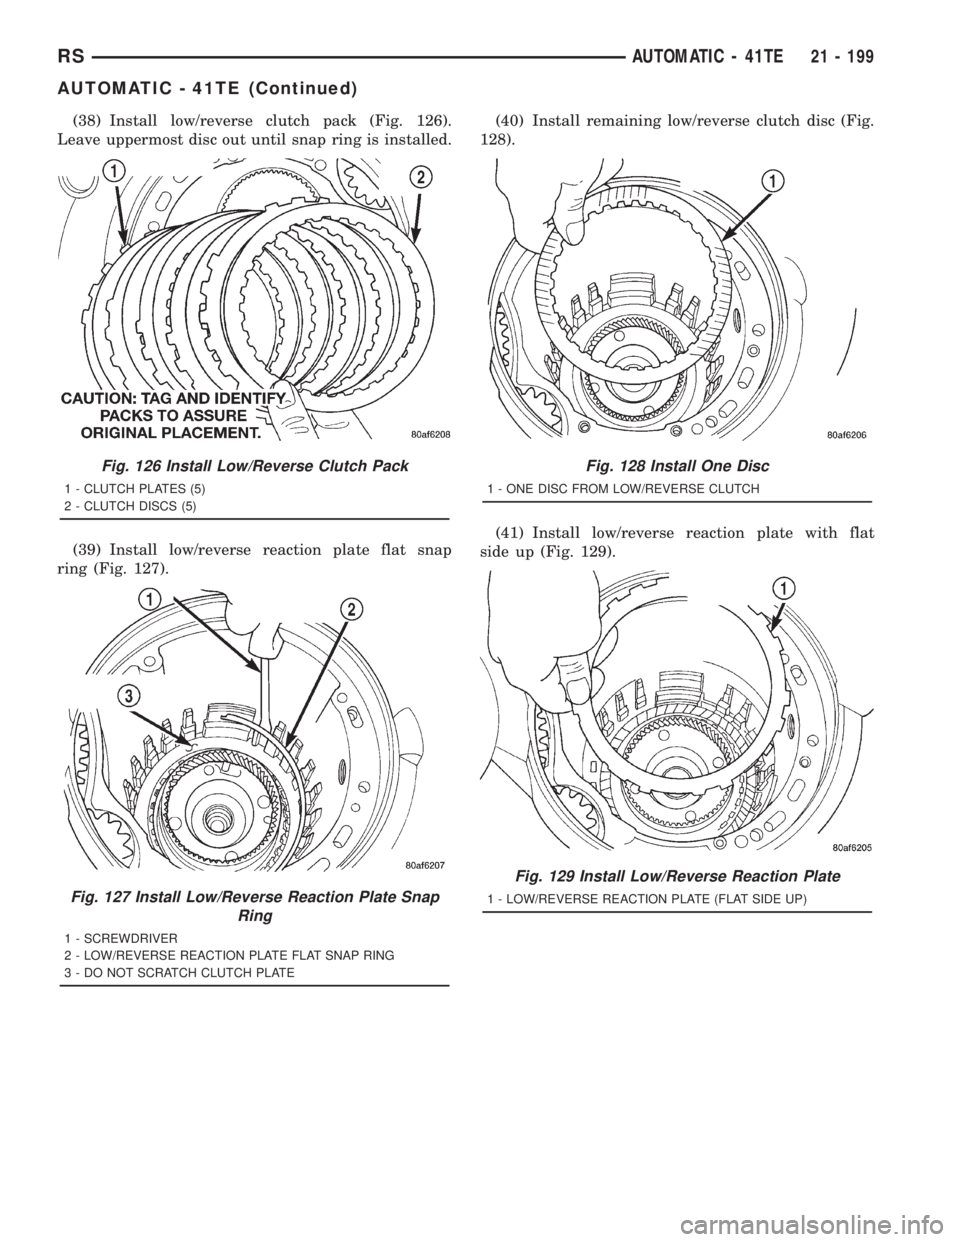 CHRYSLER VOYAGER 2001  Service Manual (38) Install low/reverse clutch pack (Fig. 126).
Leave uppermost disc out until snap ring is installed.
(39) Install low/reverse reaction plate flat snap
ring (Fig. 127).(40) Install remaining low/rev